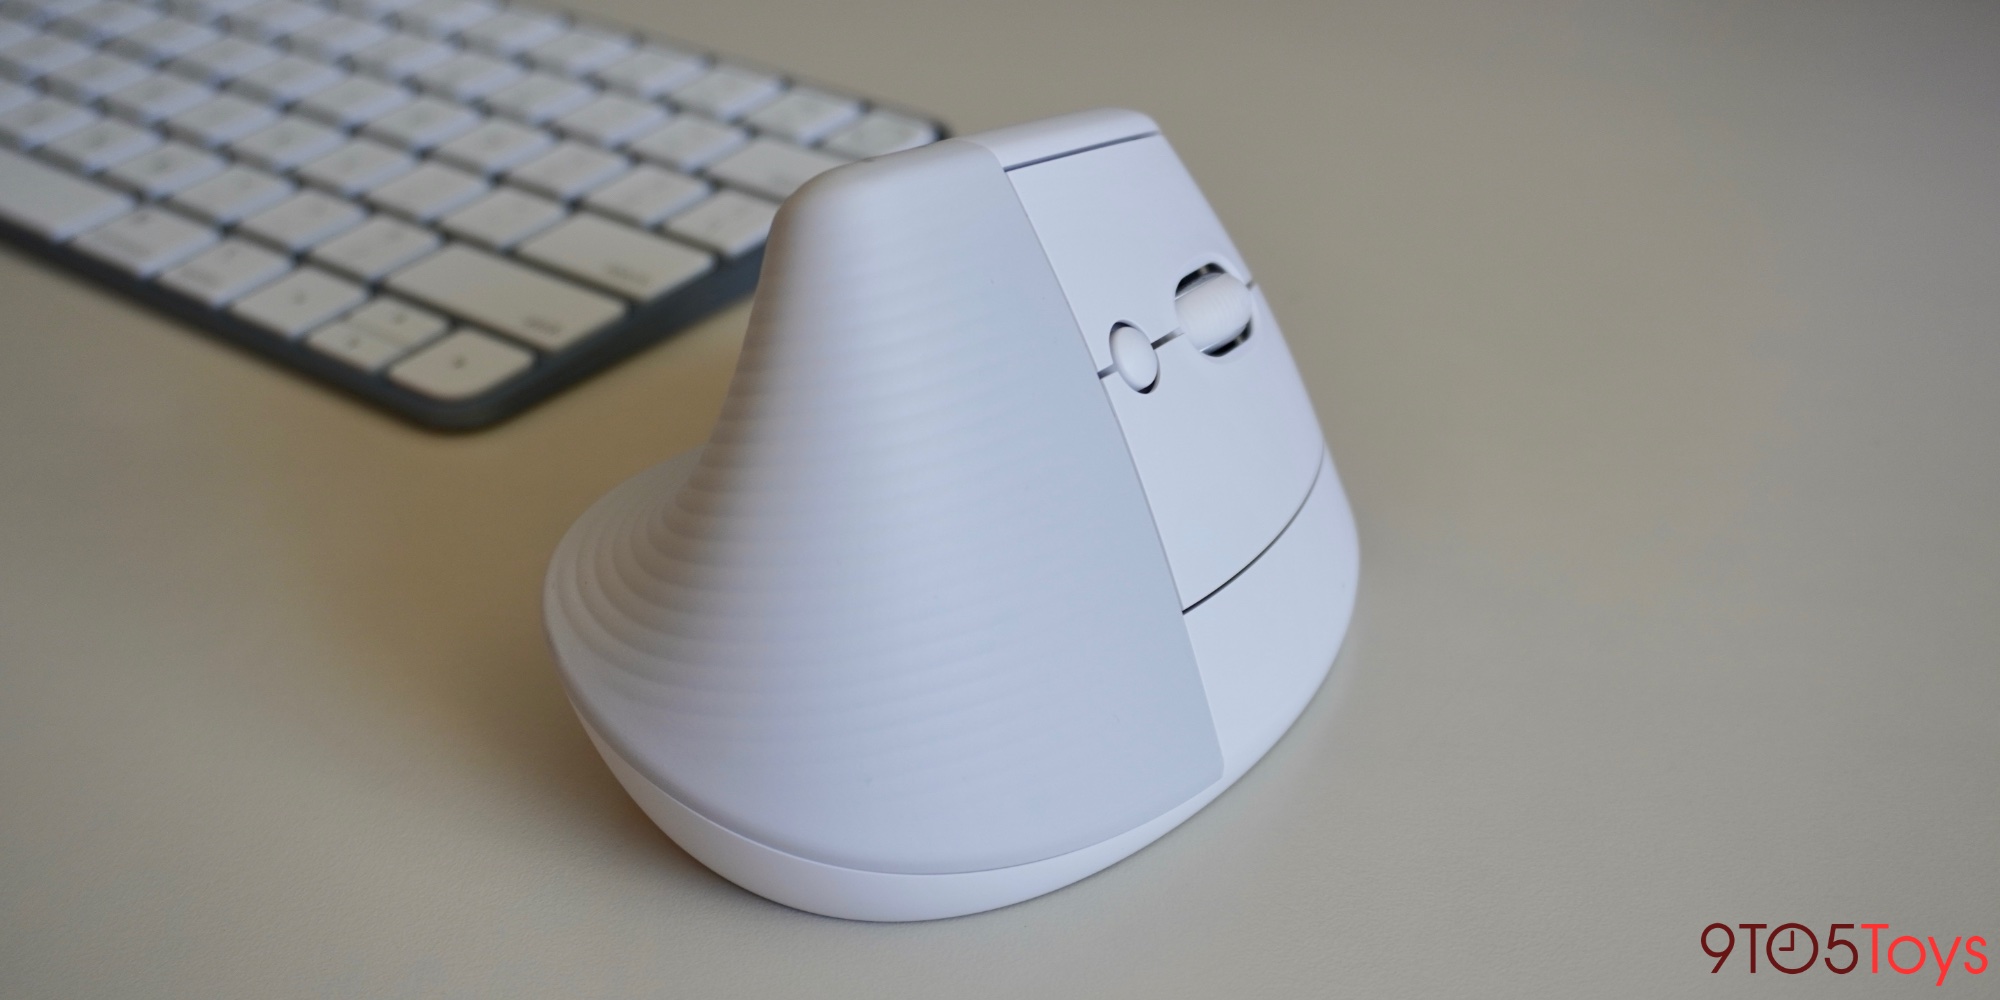 Logitech Lift review: All the right compromises - 9to5Toys